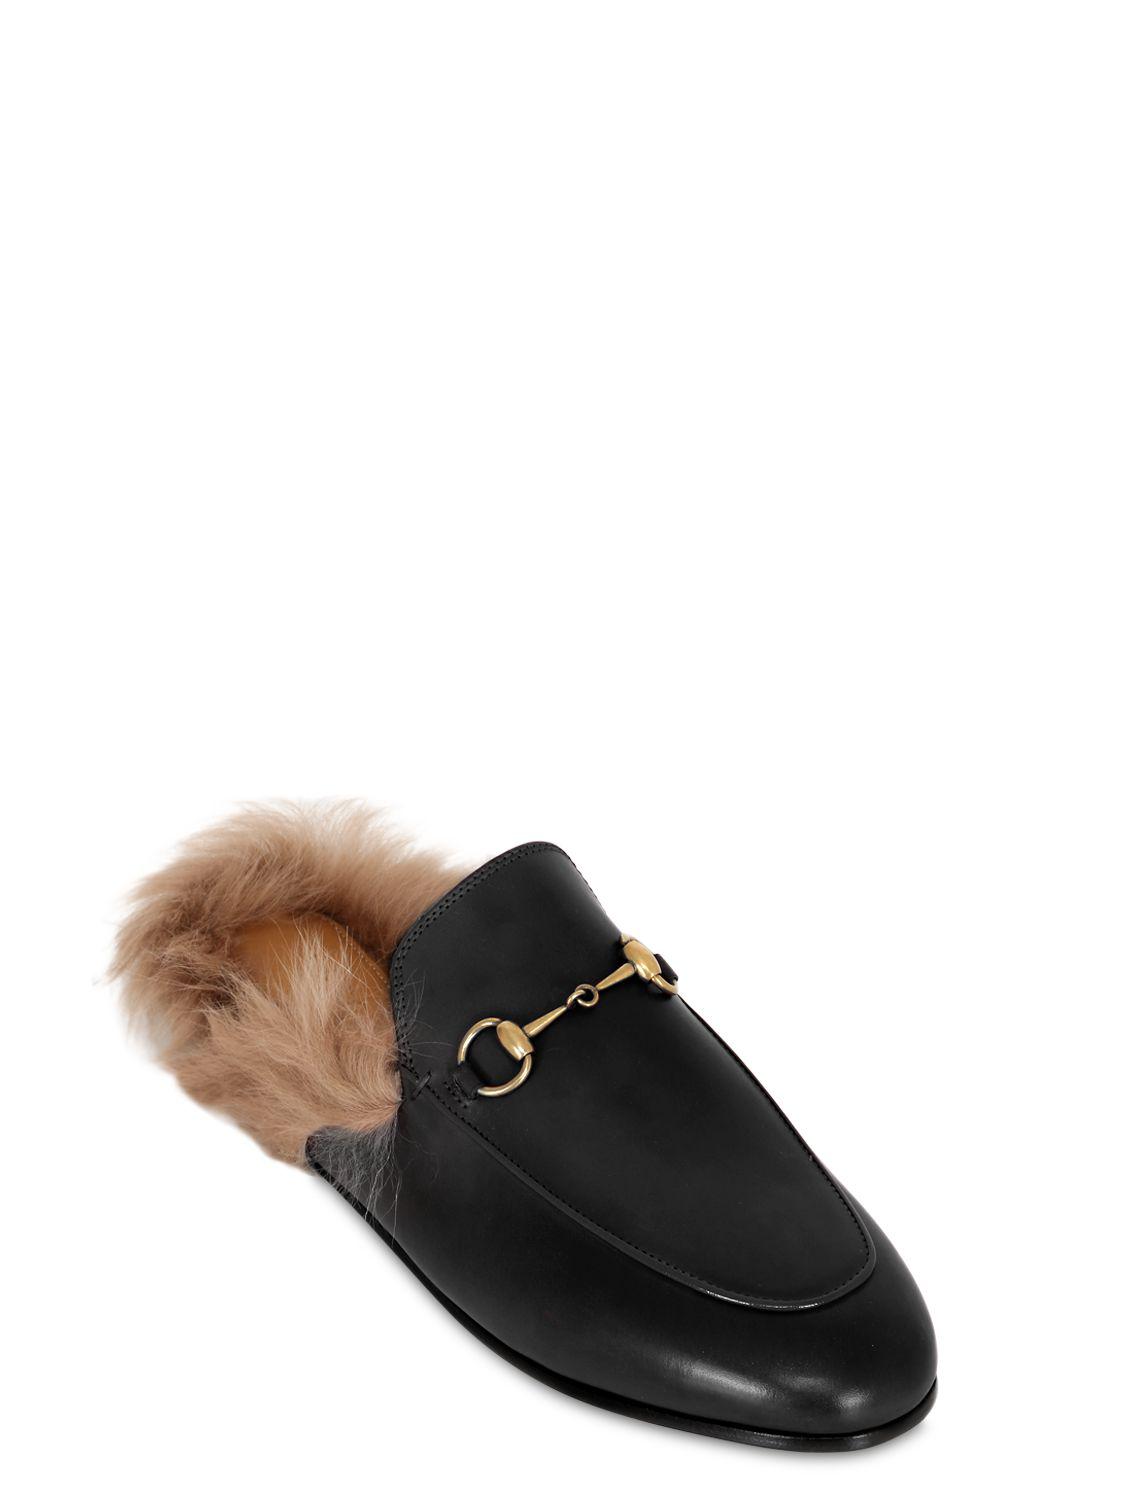 Gucci Princetown Fur-lined Leather Mule in Black | Lyst